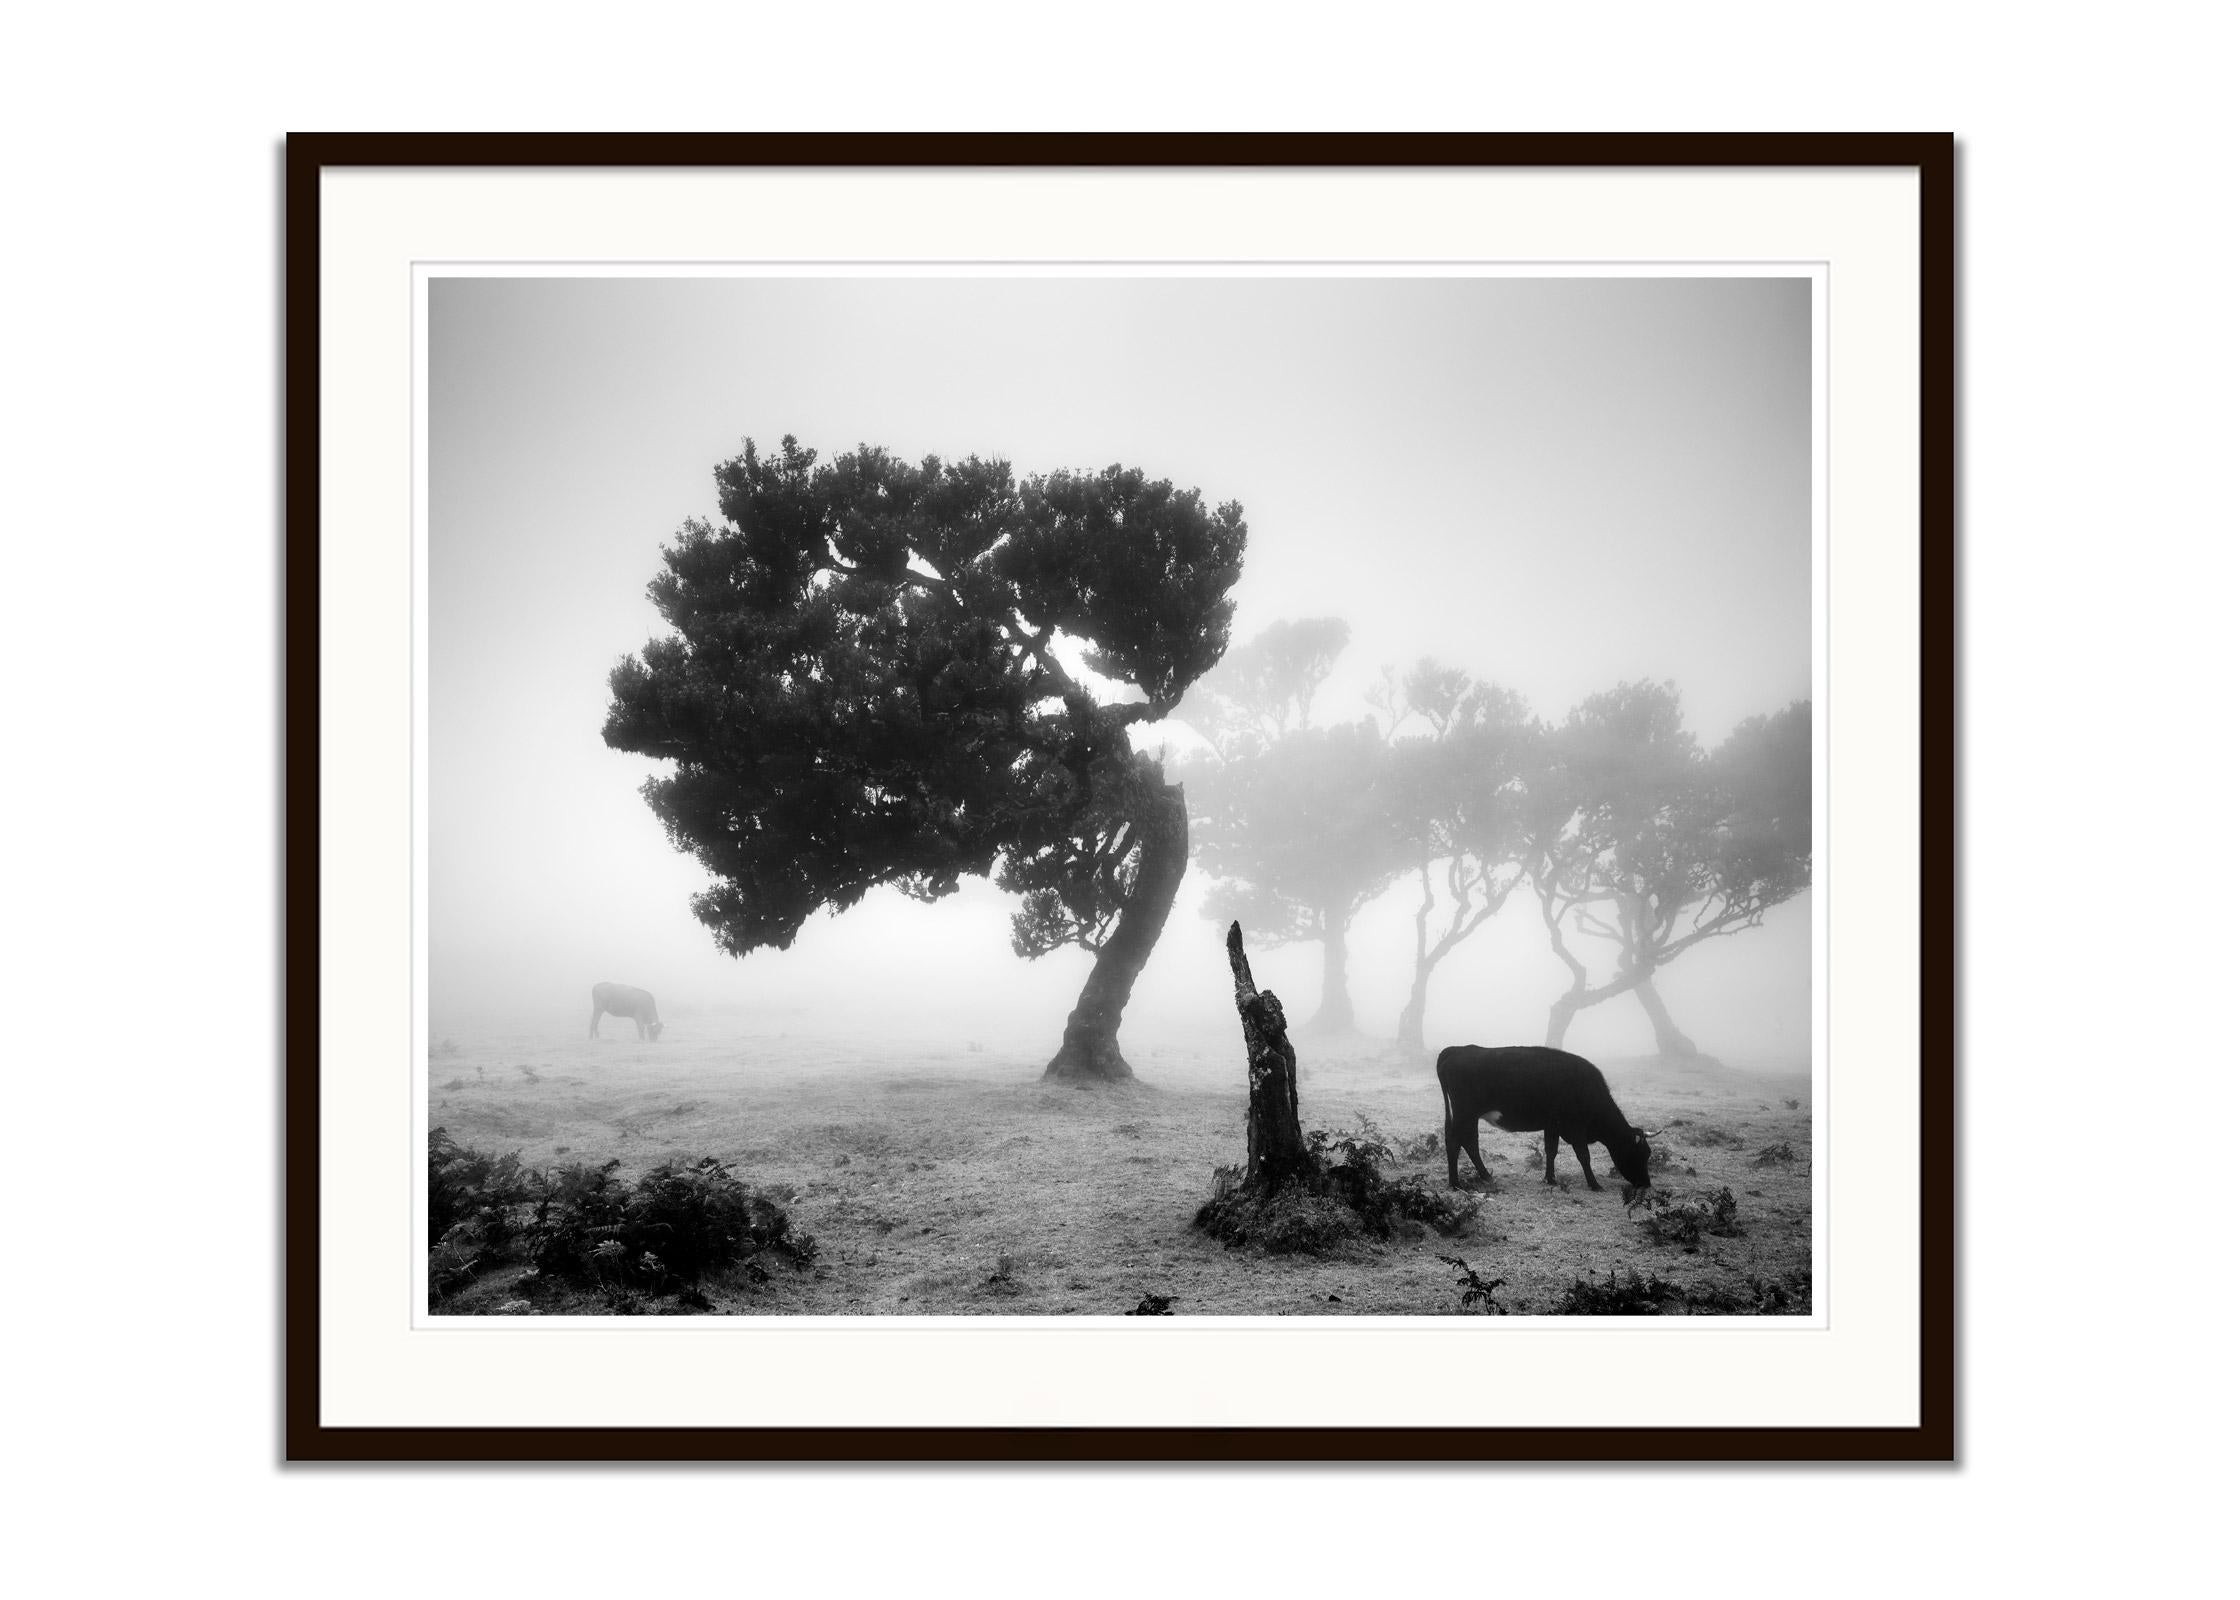 Cows on the foggy Pasture, misty forest, black and white photography, landscape - Gray Black and White Photograph by Gerald Berghammer